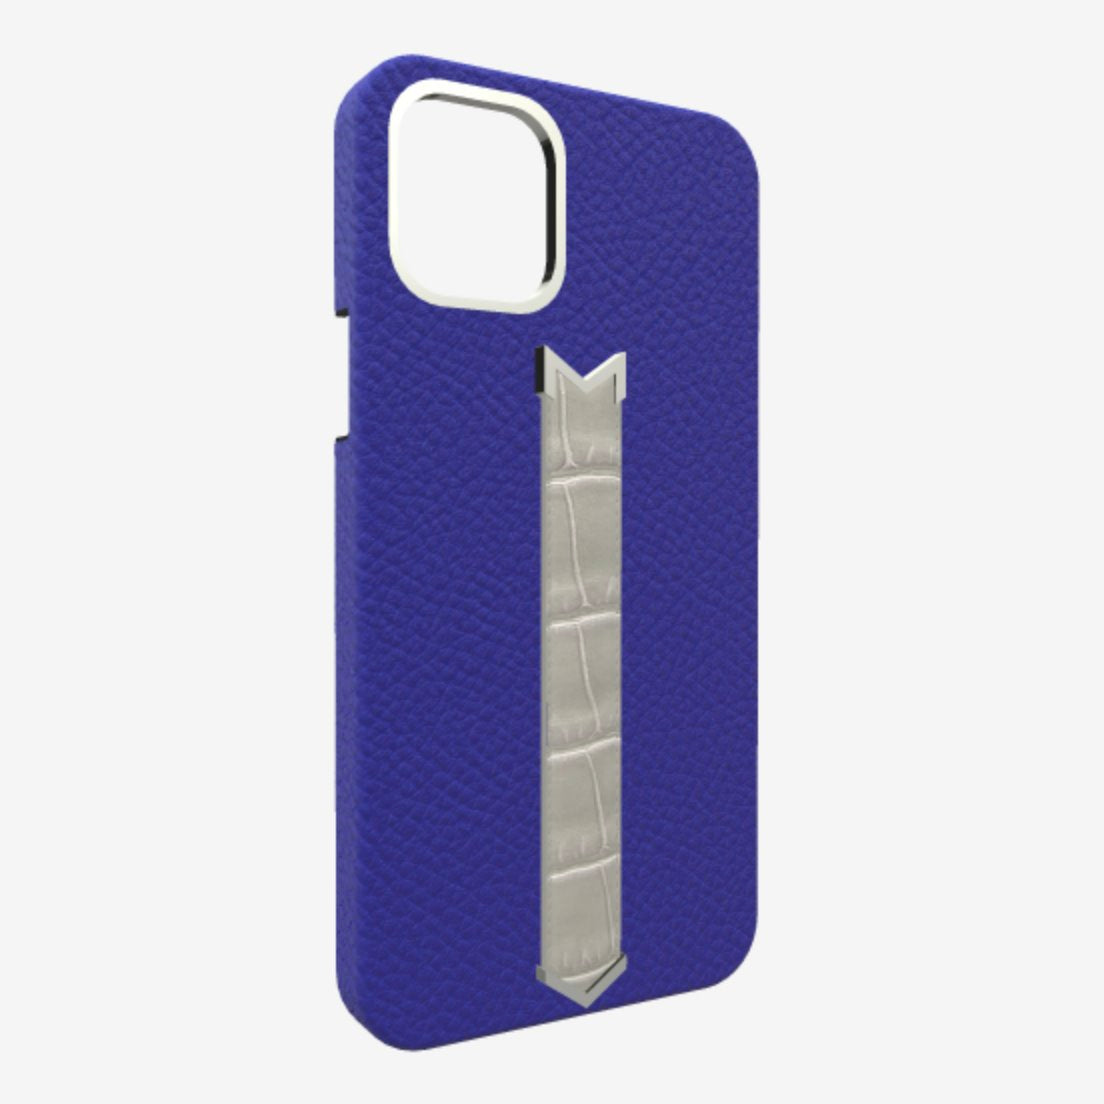 Silver Finger Strap Case for iPhone 13 Pro Max in Genuine Calfskin and Alligator Electric-Blue Pearl-Grey 